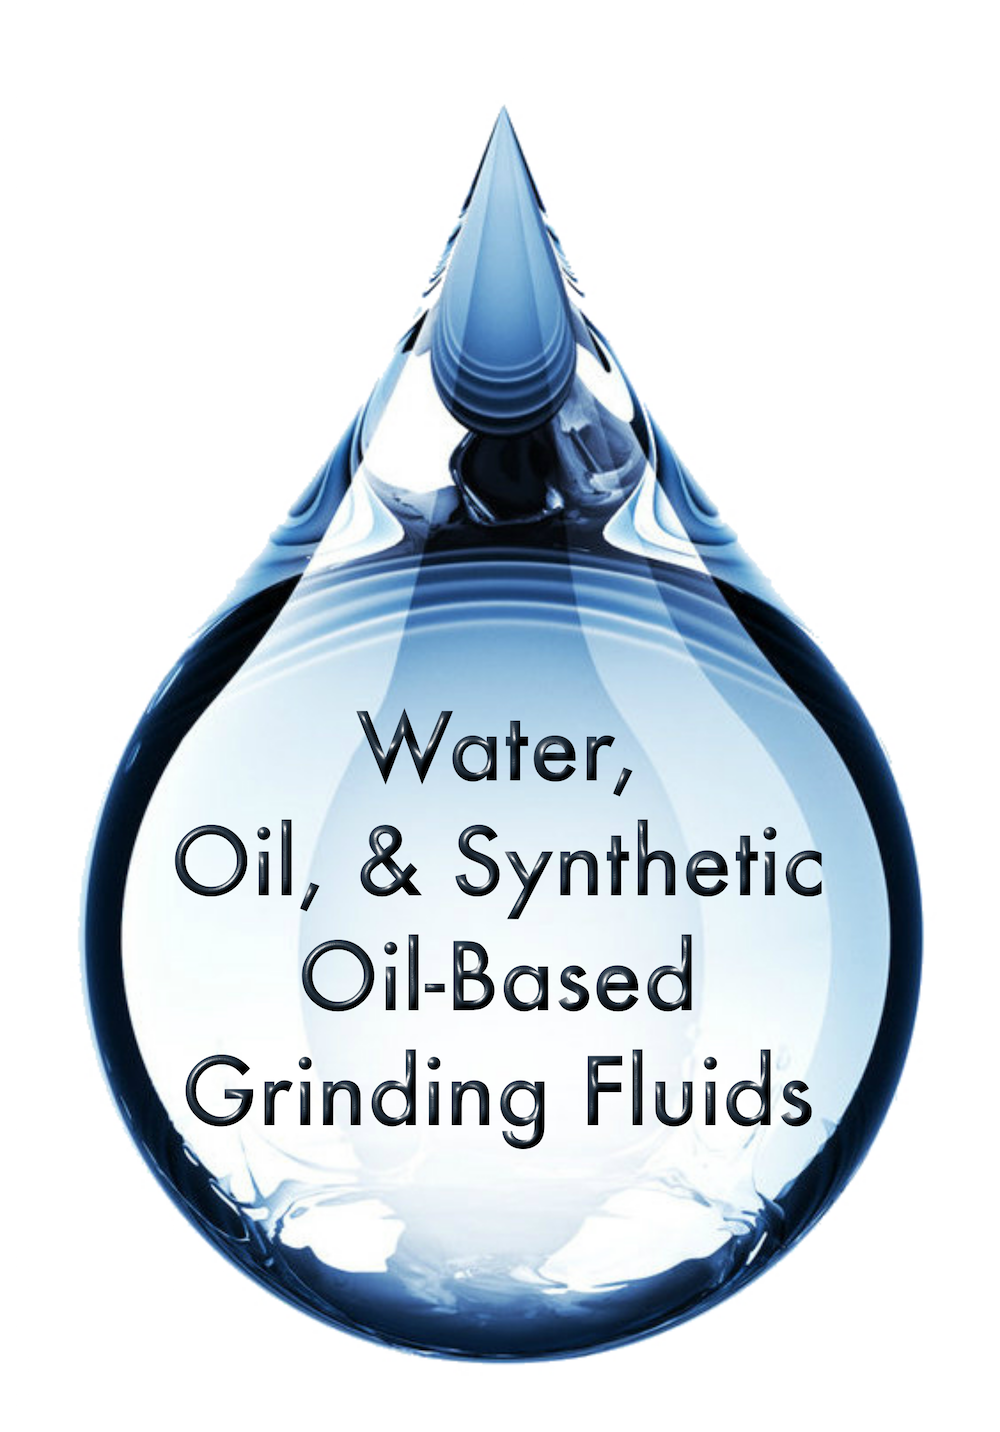 Water, Oil, and Synthetic Oil-Based Grinding Fluids